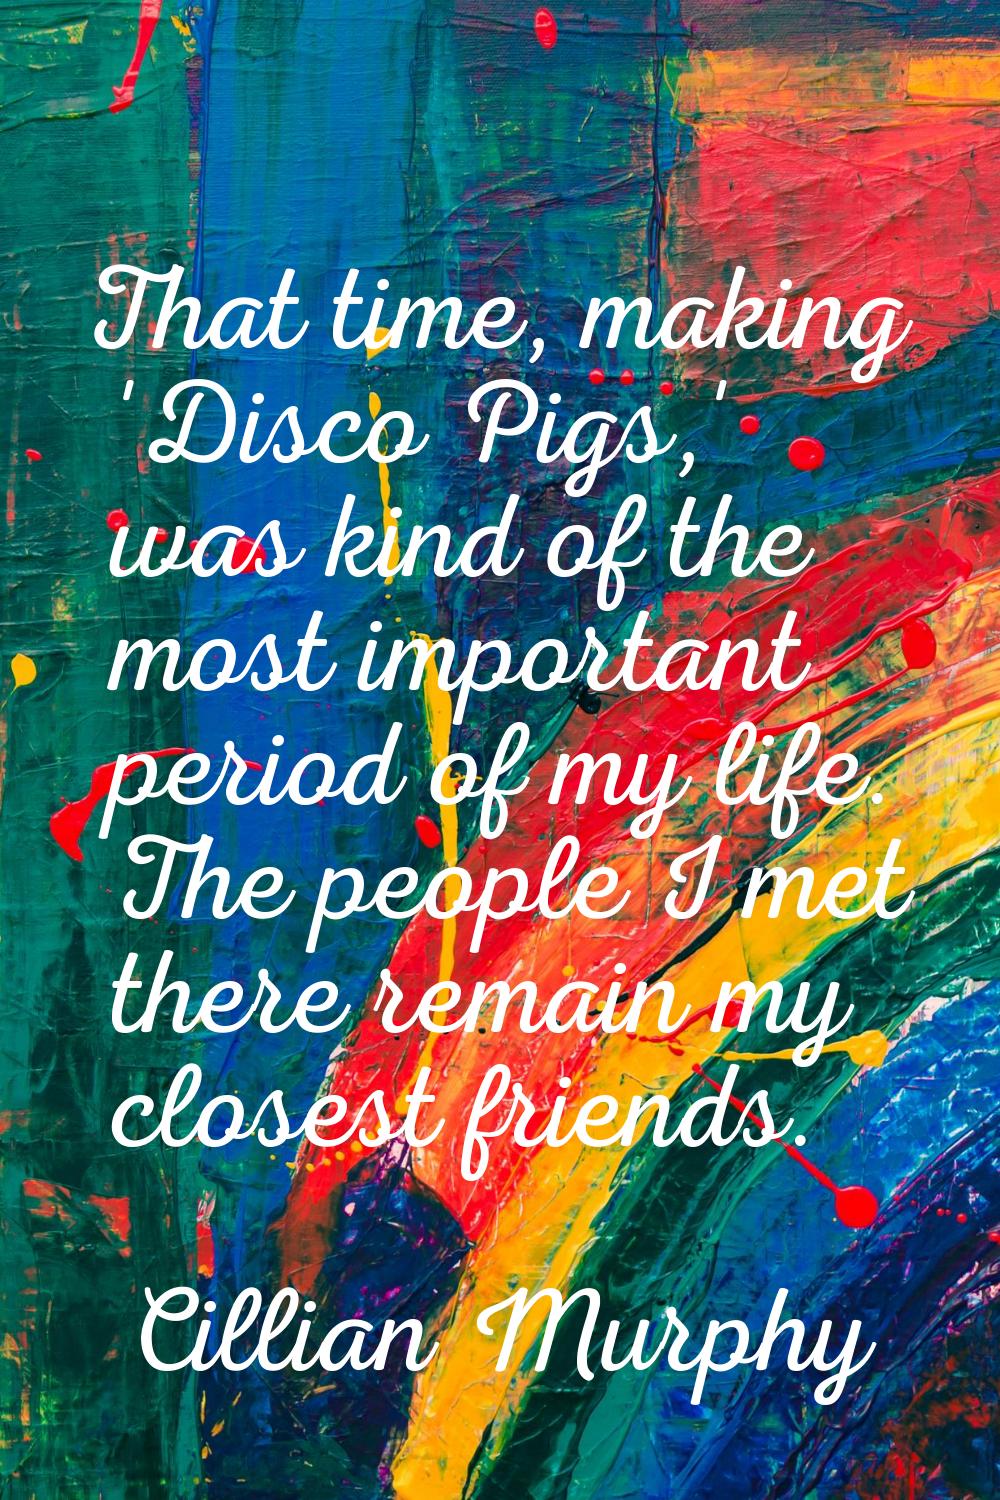 That time, making 'Disco Pigs,' was kind of the most important period of my life. The people I met 